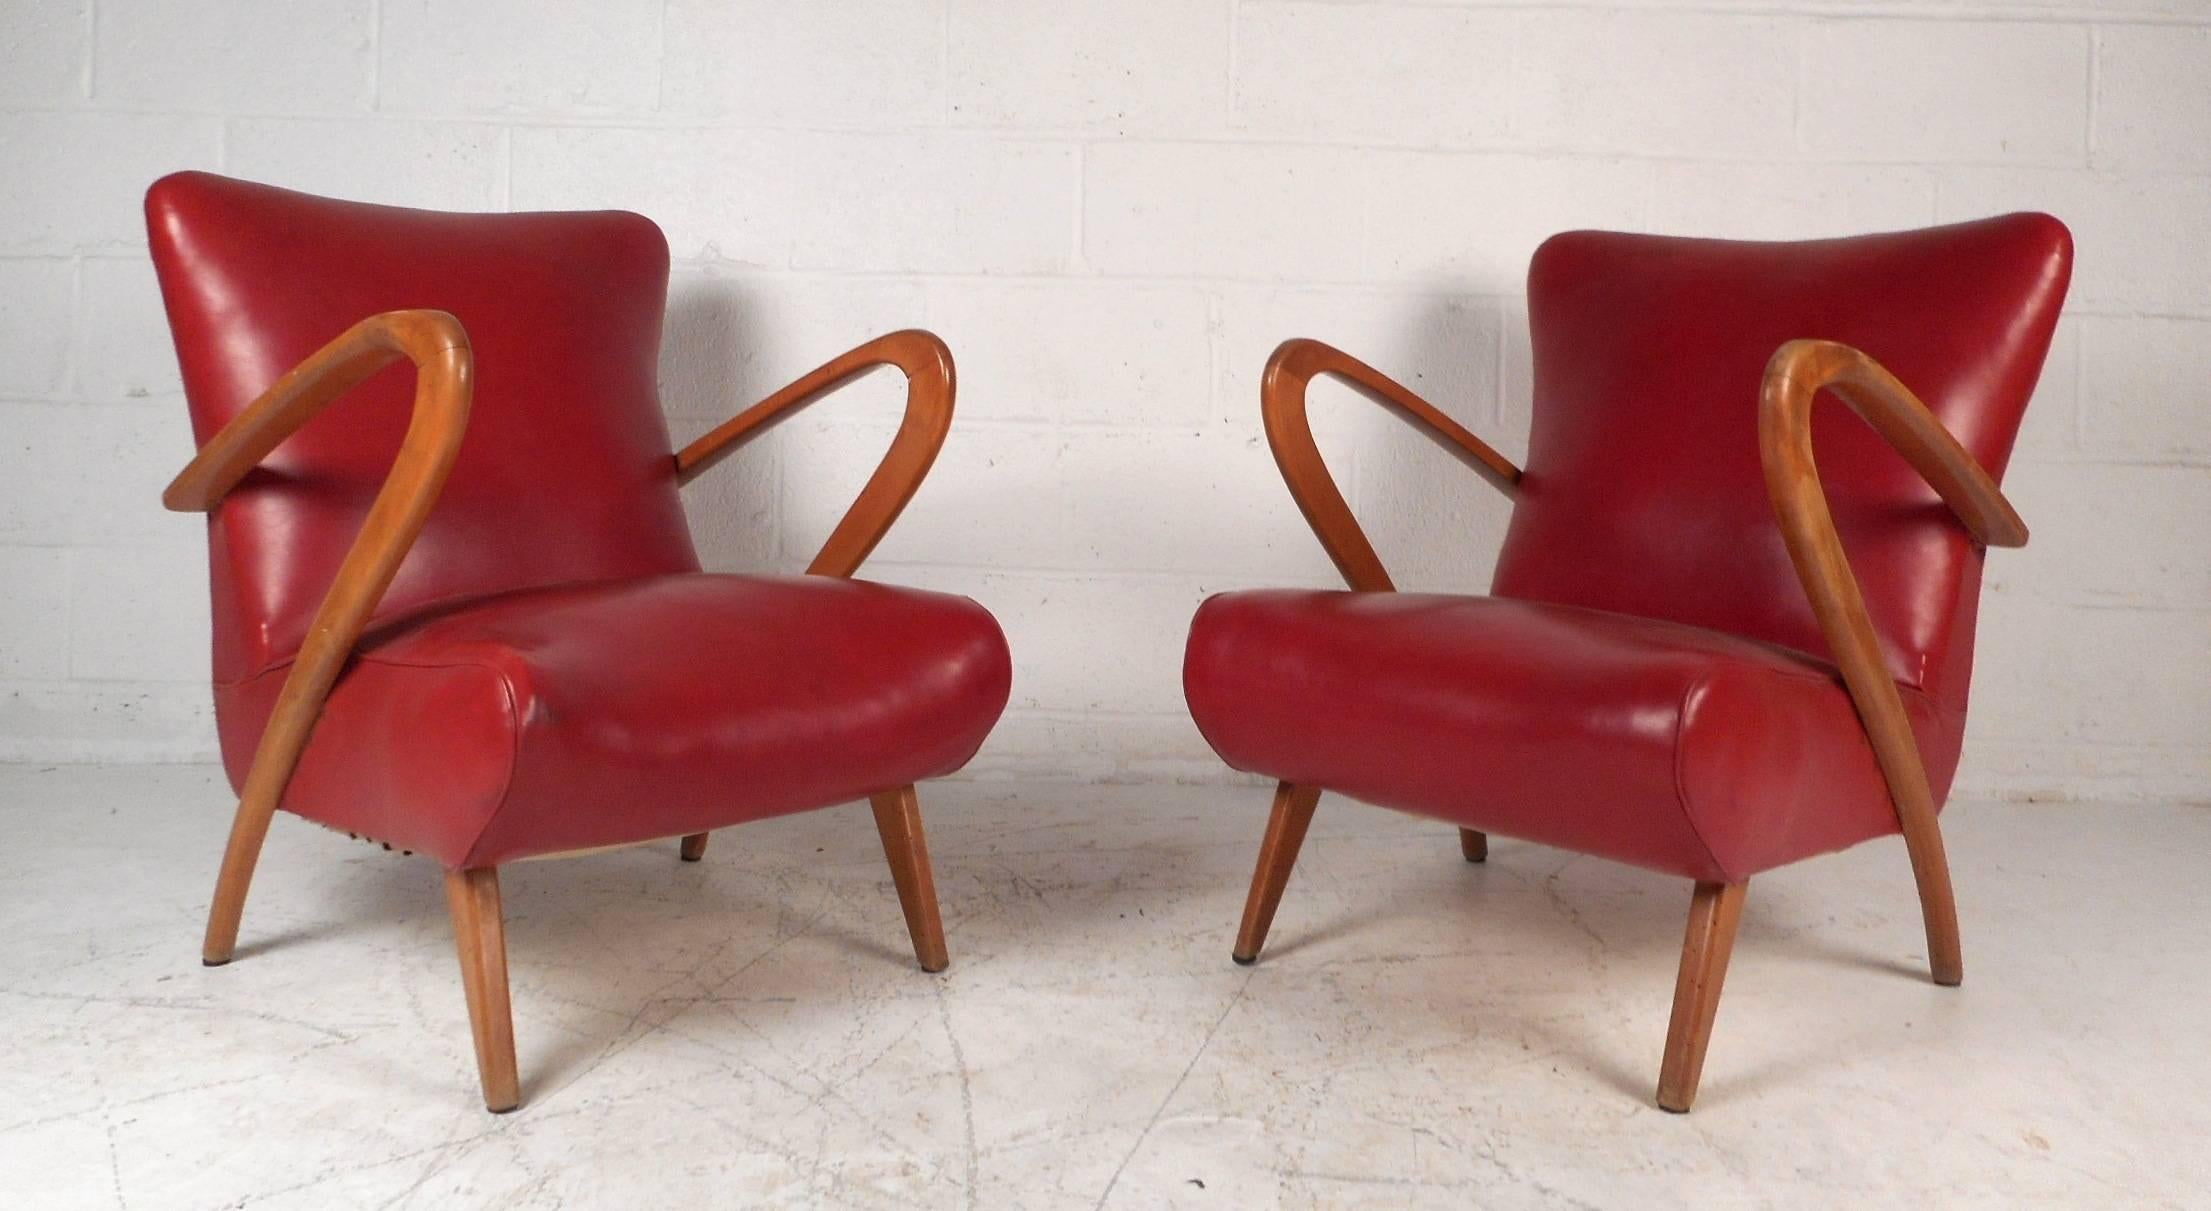 This beautiful vintage modern pair of lounge chairs feature sculptural armrests, angled legs, and elegant light wood grain. This comfortable pair have thick padded seating and elegant red vinyl upholstery. Sleek design has the perfect contours for